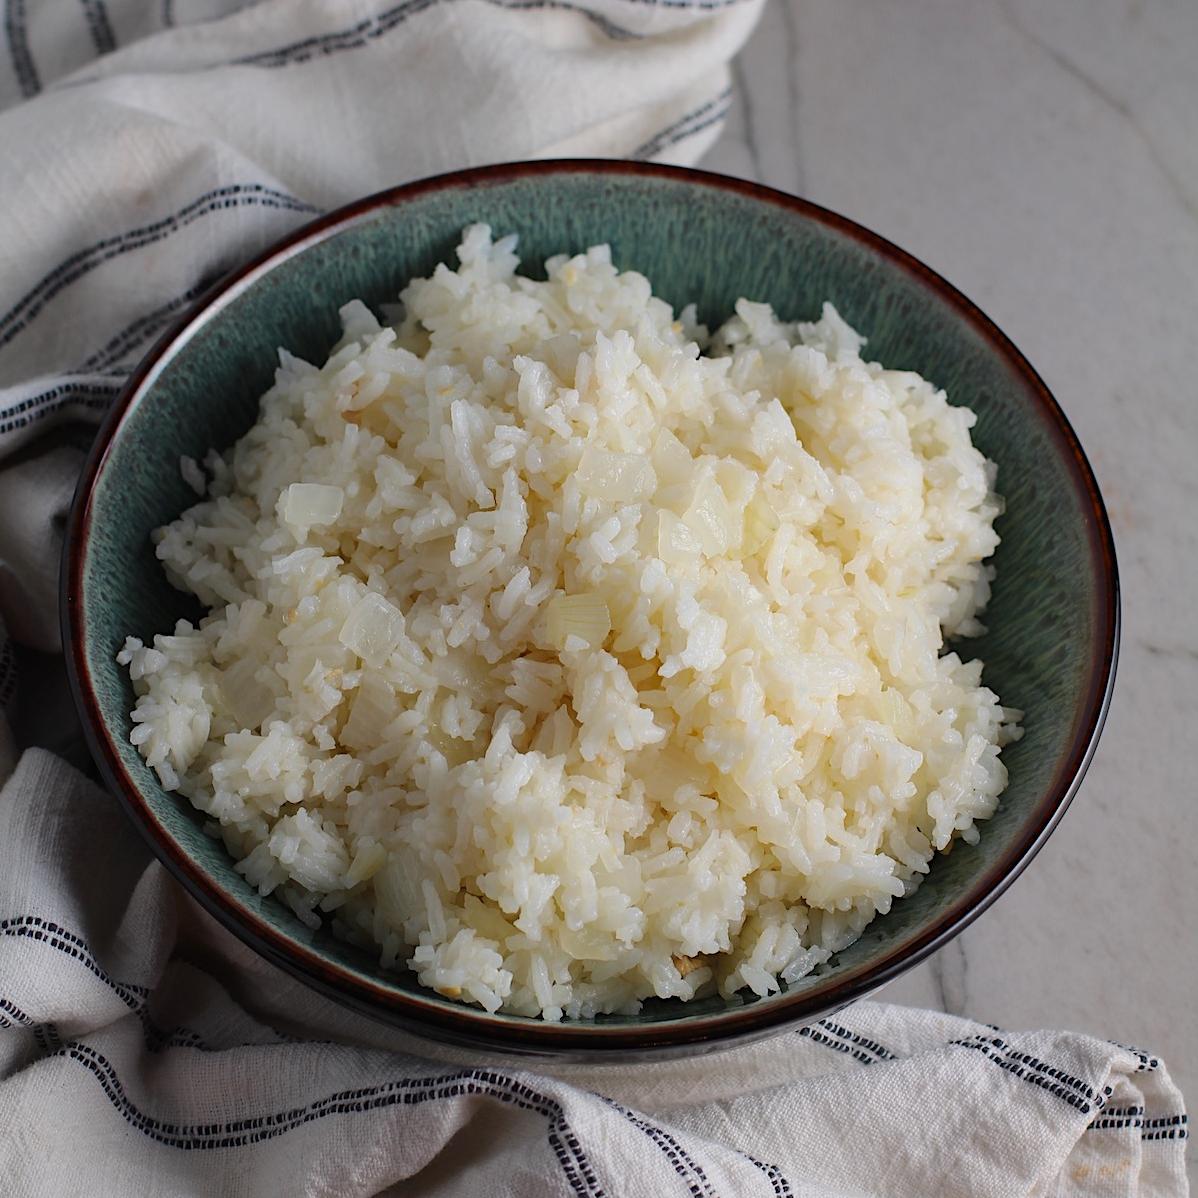  The perfect companion to any protein, this Brazilian garlic rice is a must-try.